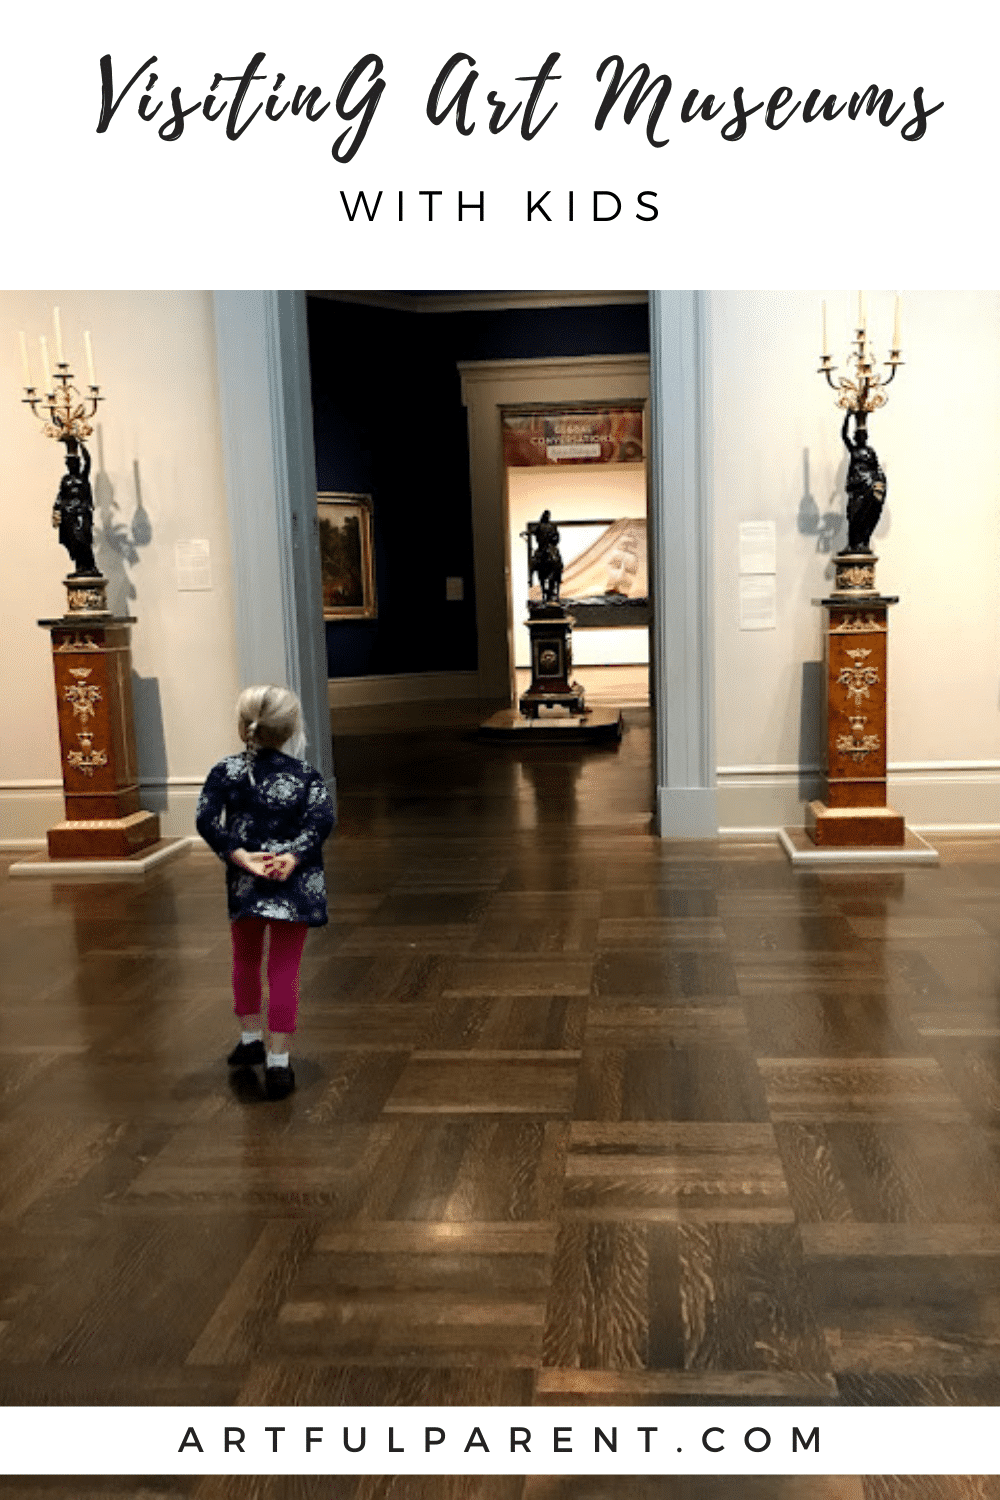 How to Visit an Art Museum with Kids